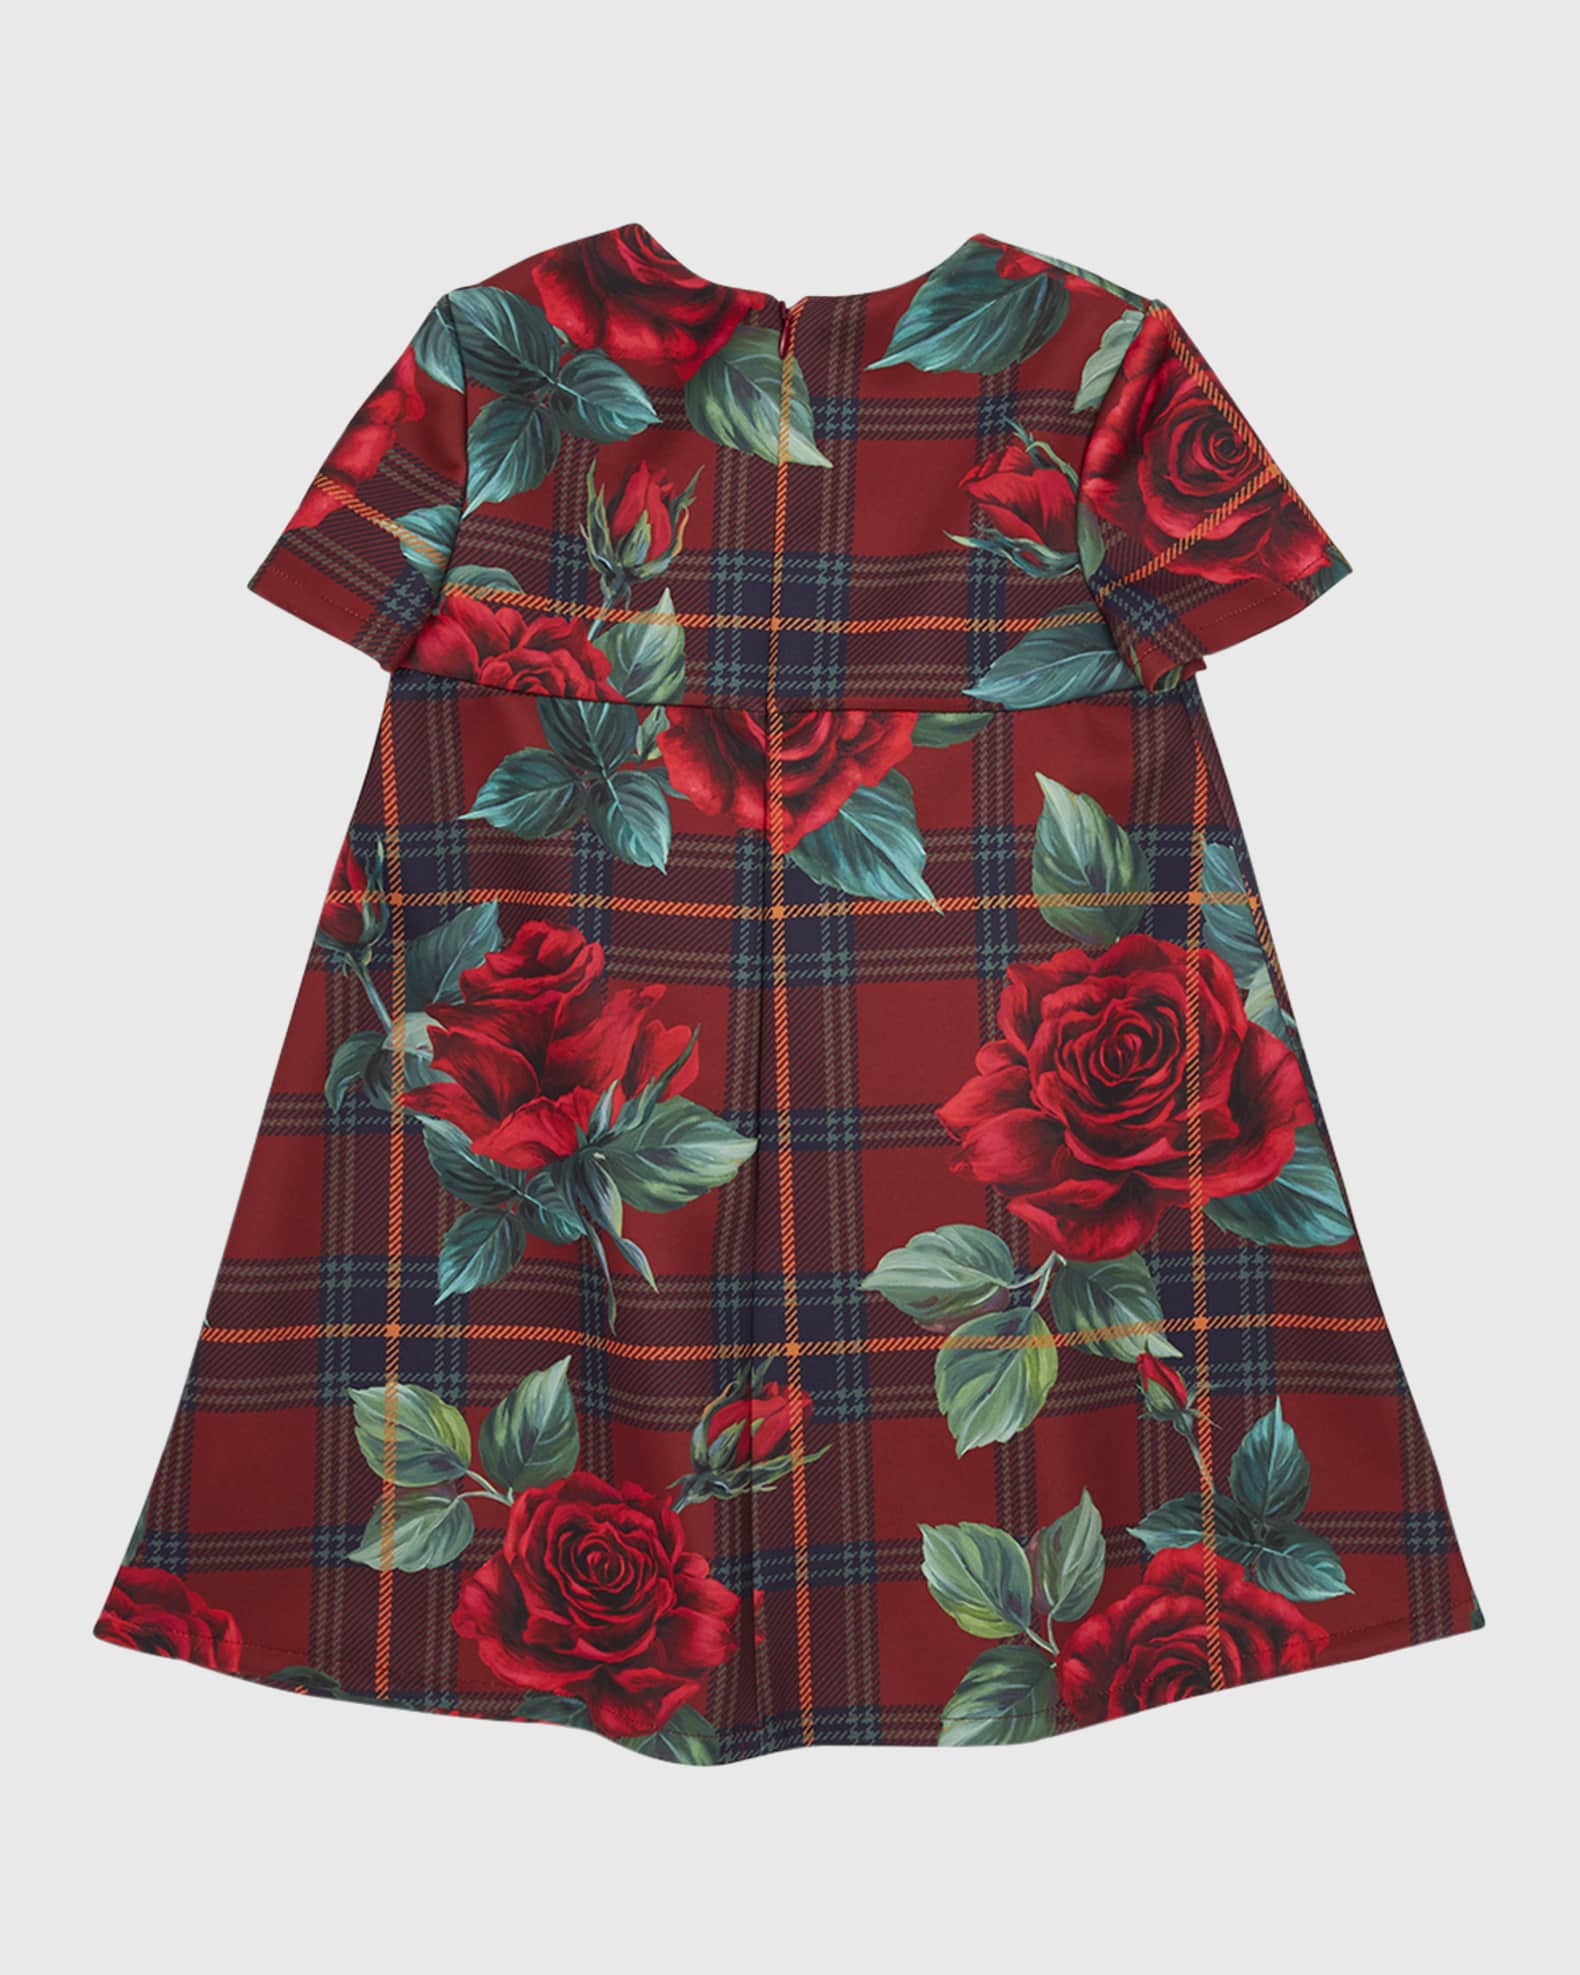 Dolce&Gabbana Girl's Back To School Rose-Print Pleated Dress, Size 4-6 ...